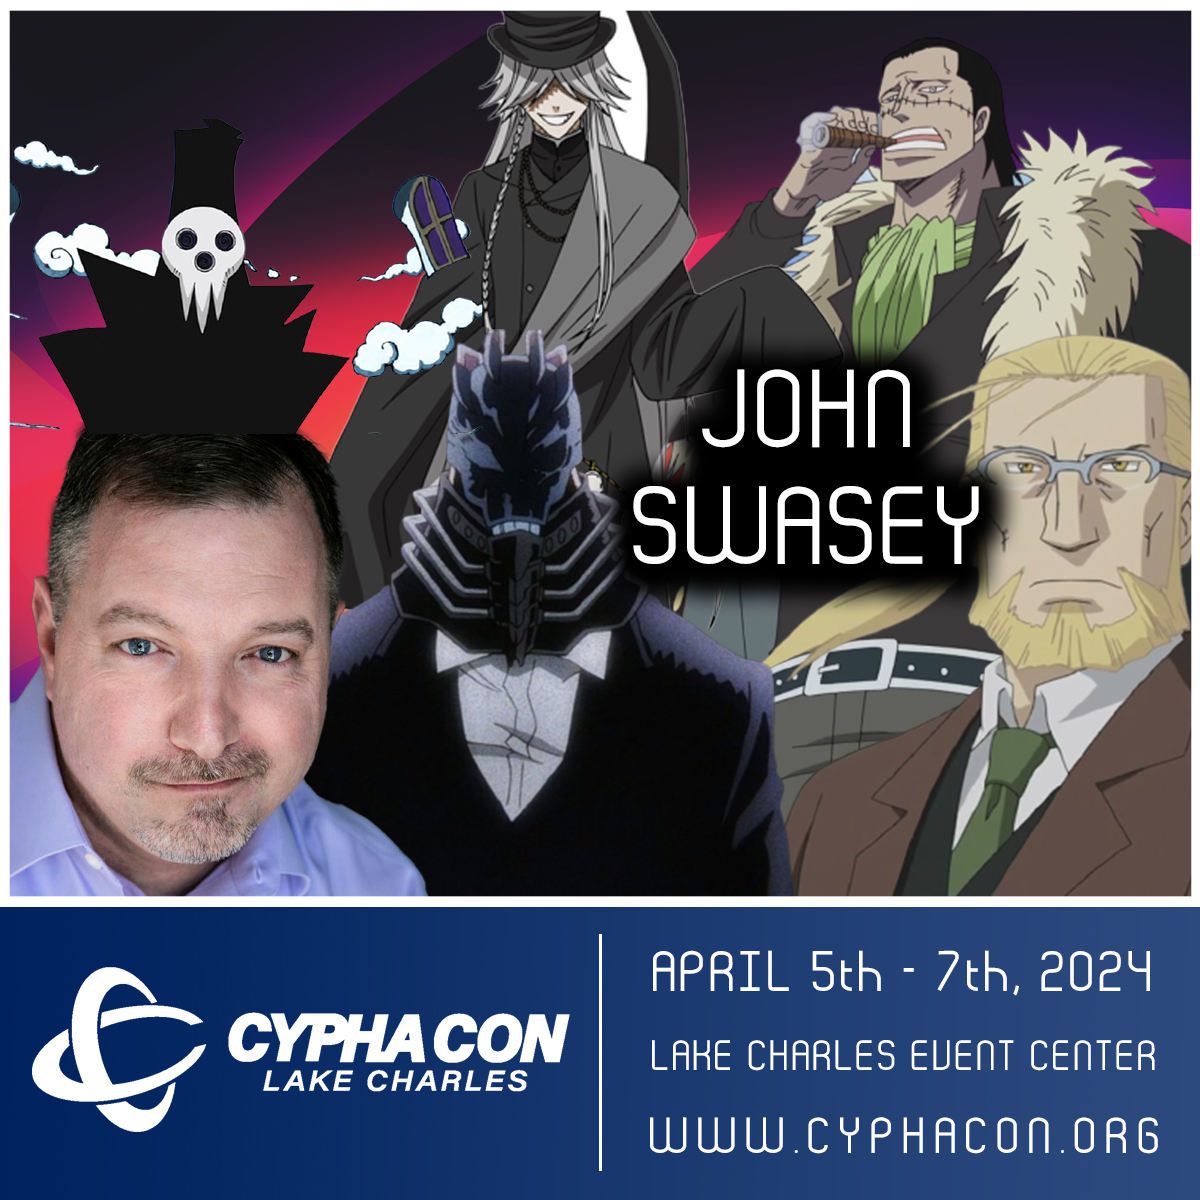 CYPHACON is pleased to announce one last guest, John Swasey @swapmonster John will be joining us April 5th - 7th, 2024 at the @LCCivicCenter in Lake Charles Louisiana! For complete information visit our website, tickets on sale now! cyphacon.org/speakers/featu…